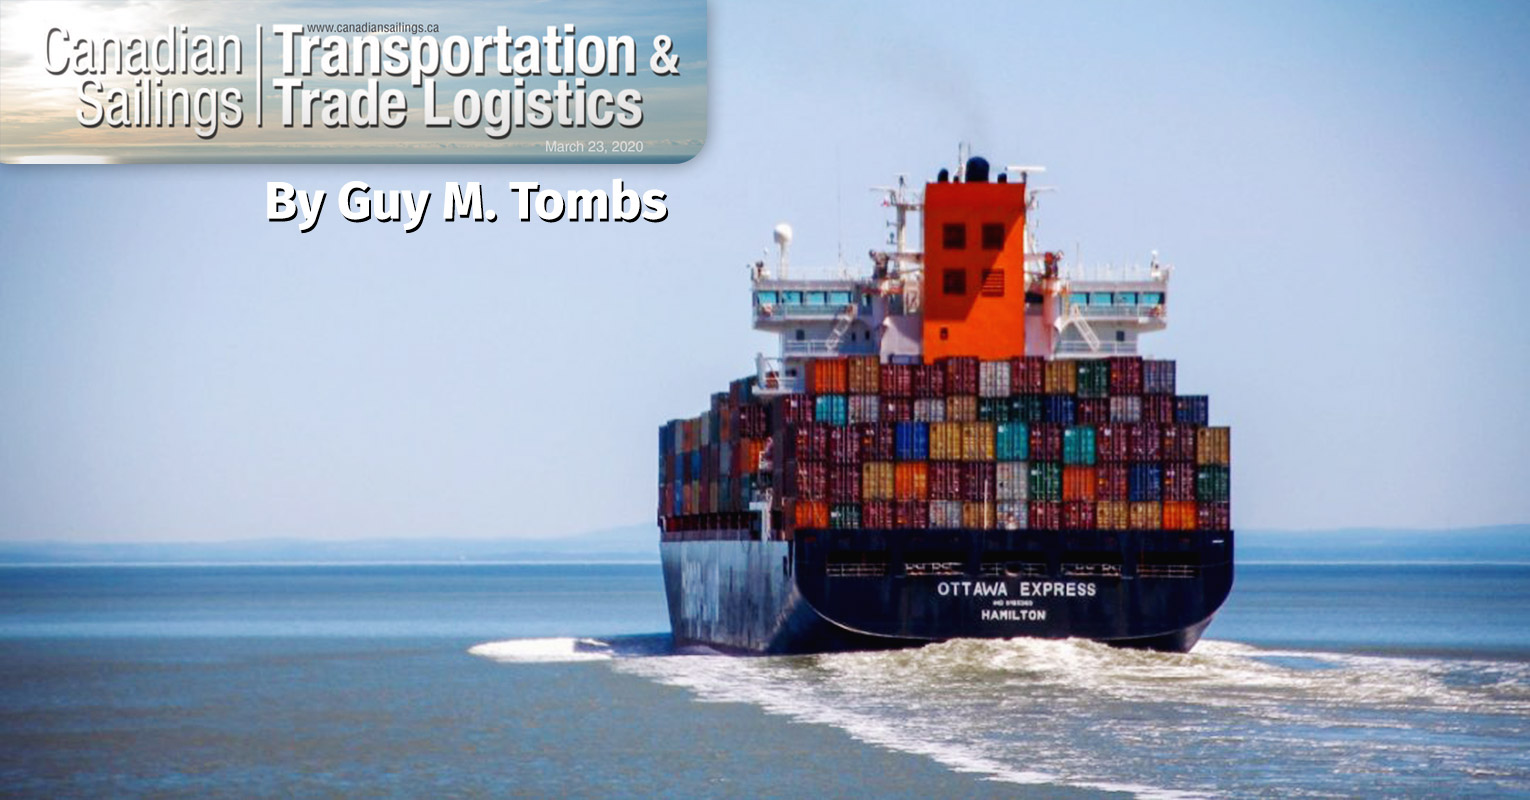 Growing a Shipping Company - Article in Canadian Sailings - by Guy M. Tombs